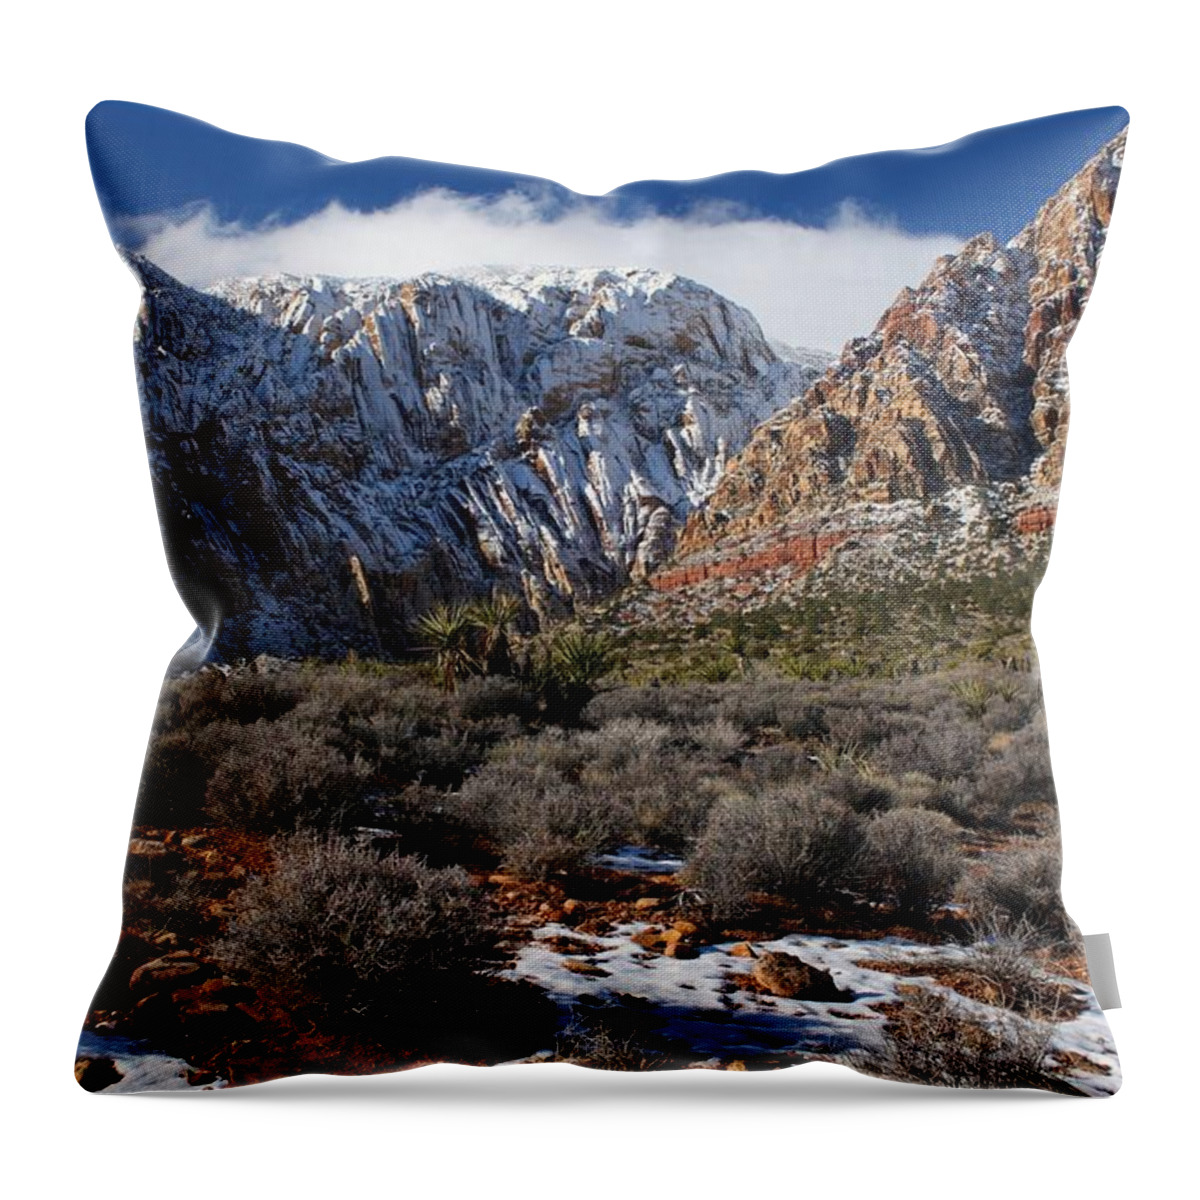 Red Rock Canyon National Conservation Area Throw Pillow featuring the photograph Snowcapped Mountains And Desert by Photography By R. L. Pniewski